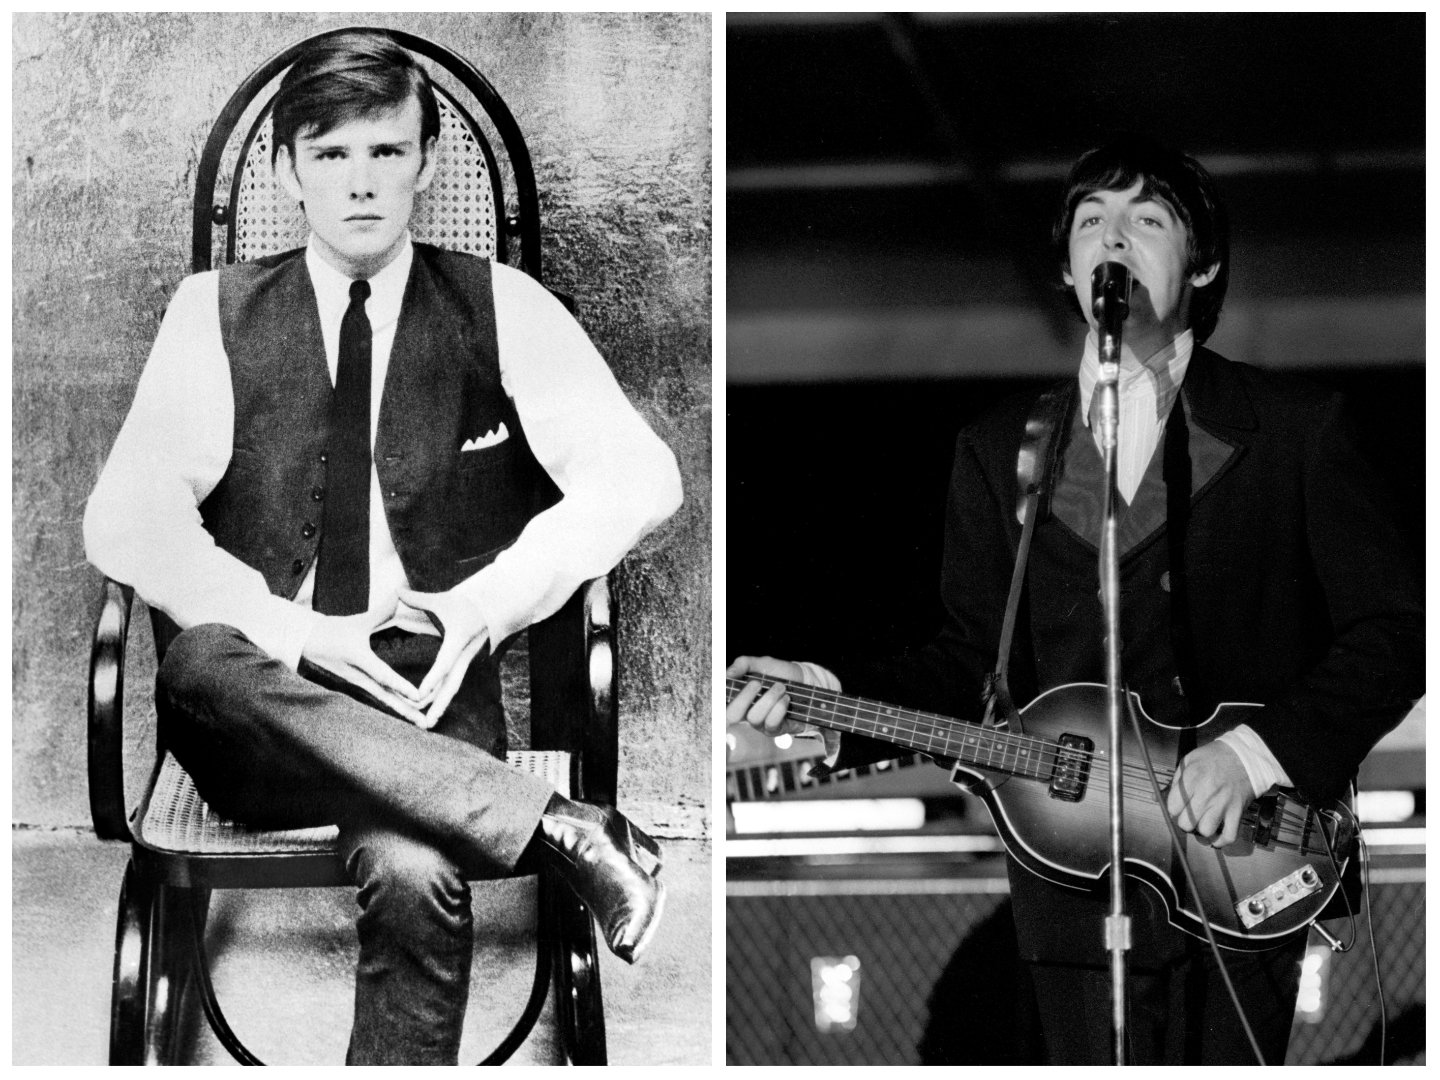 A black and white picture of Stuart Sutcliffe sitting in a chair. Paul McCartney stands at a microphone and plays guitar.